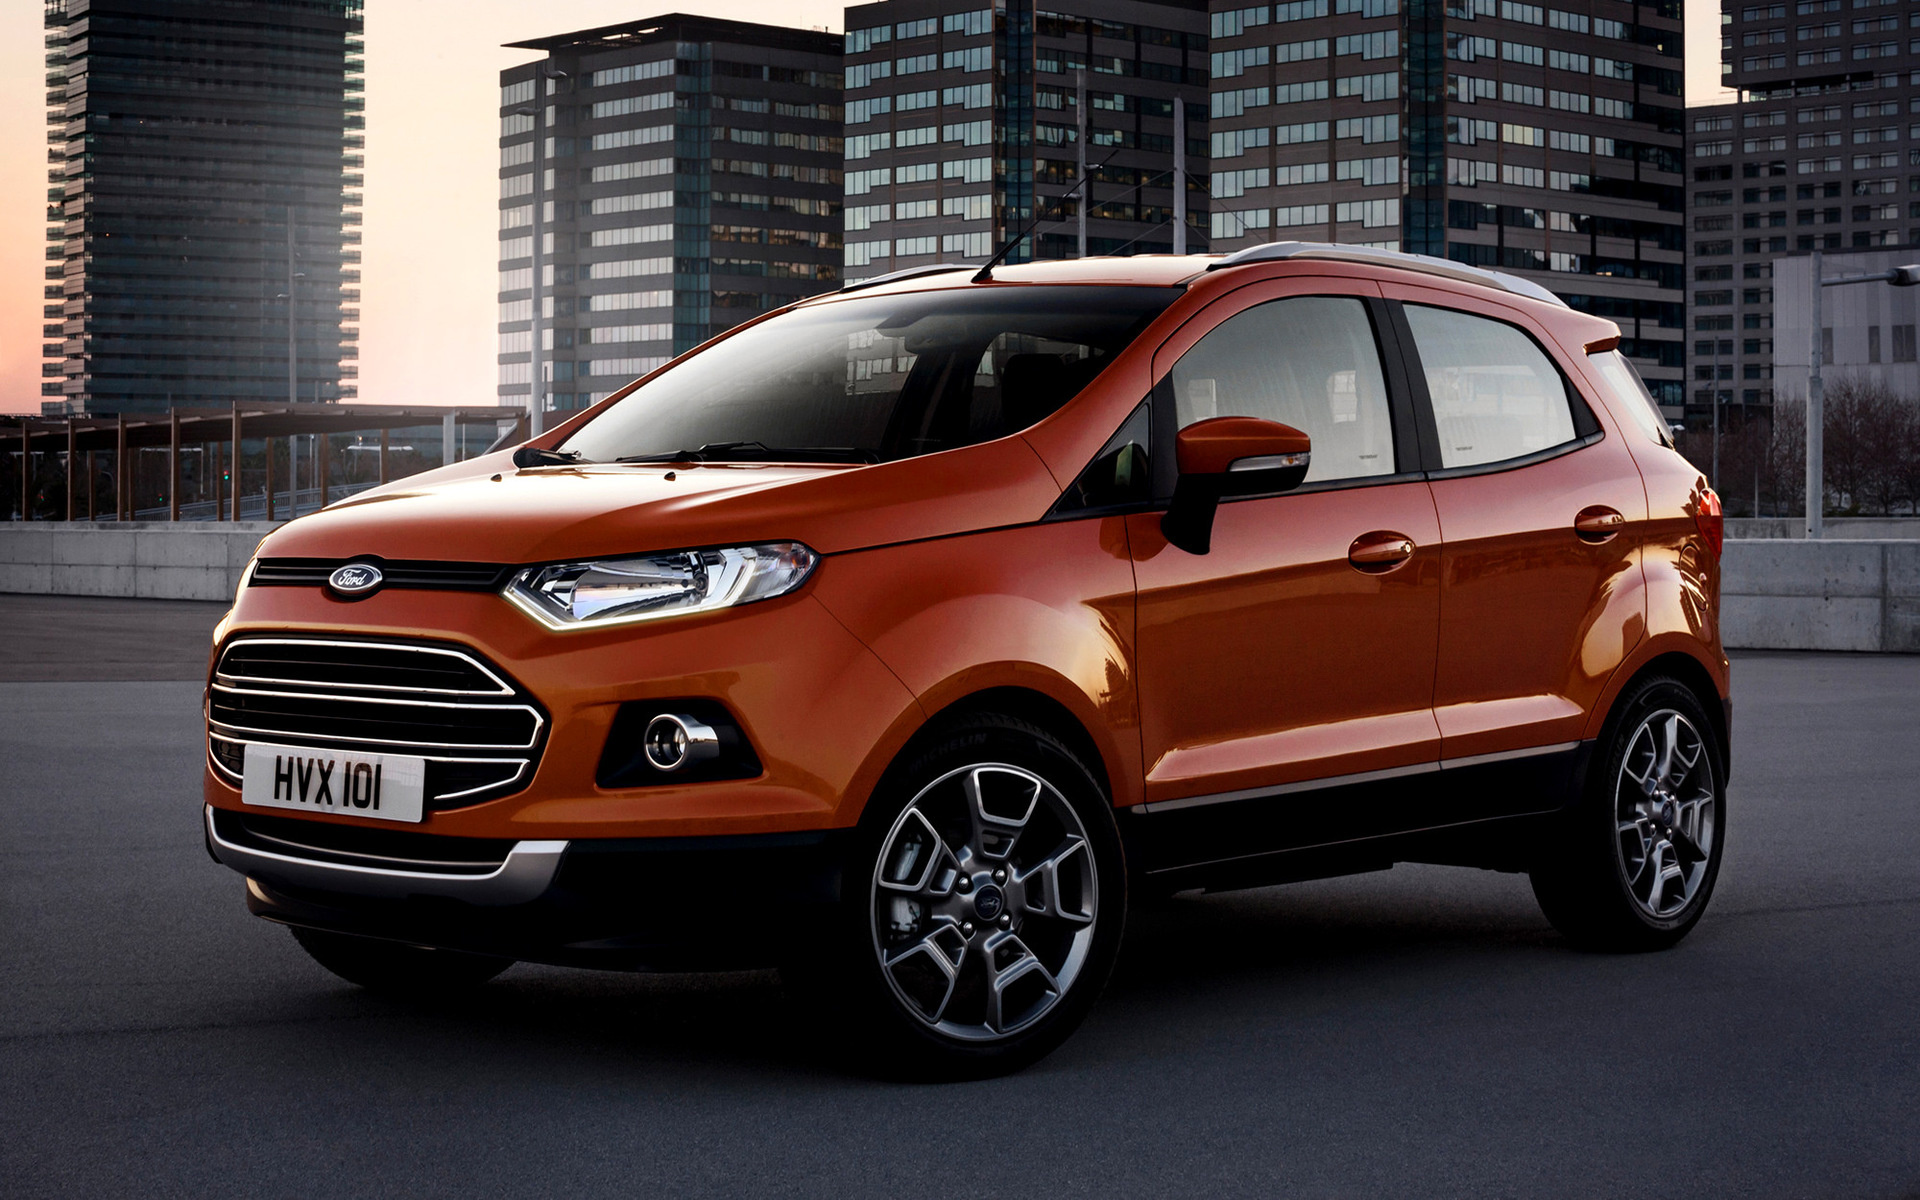 Ford EcoSport, Year 2014, Car wallpapers, HD images, 1920x1200 HD Desktop